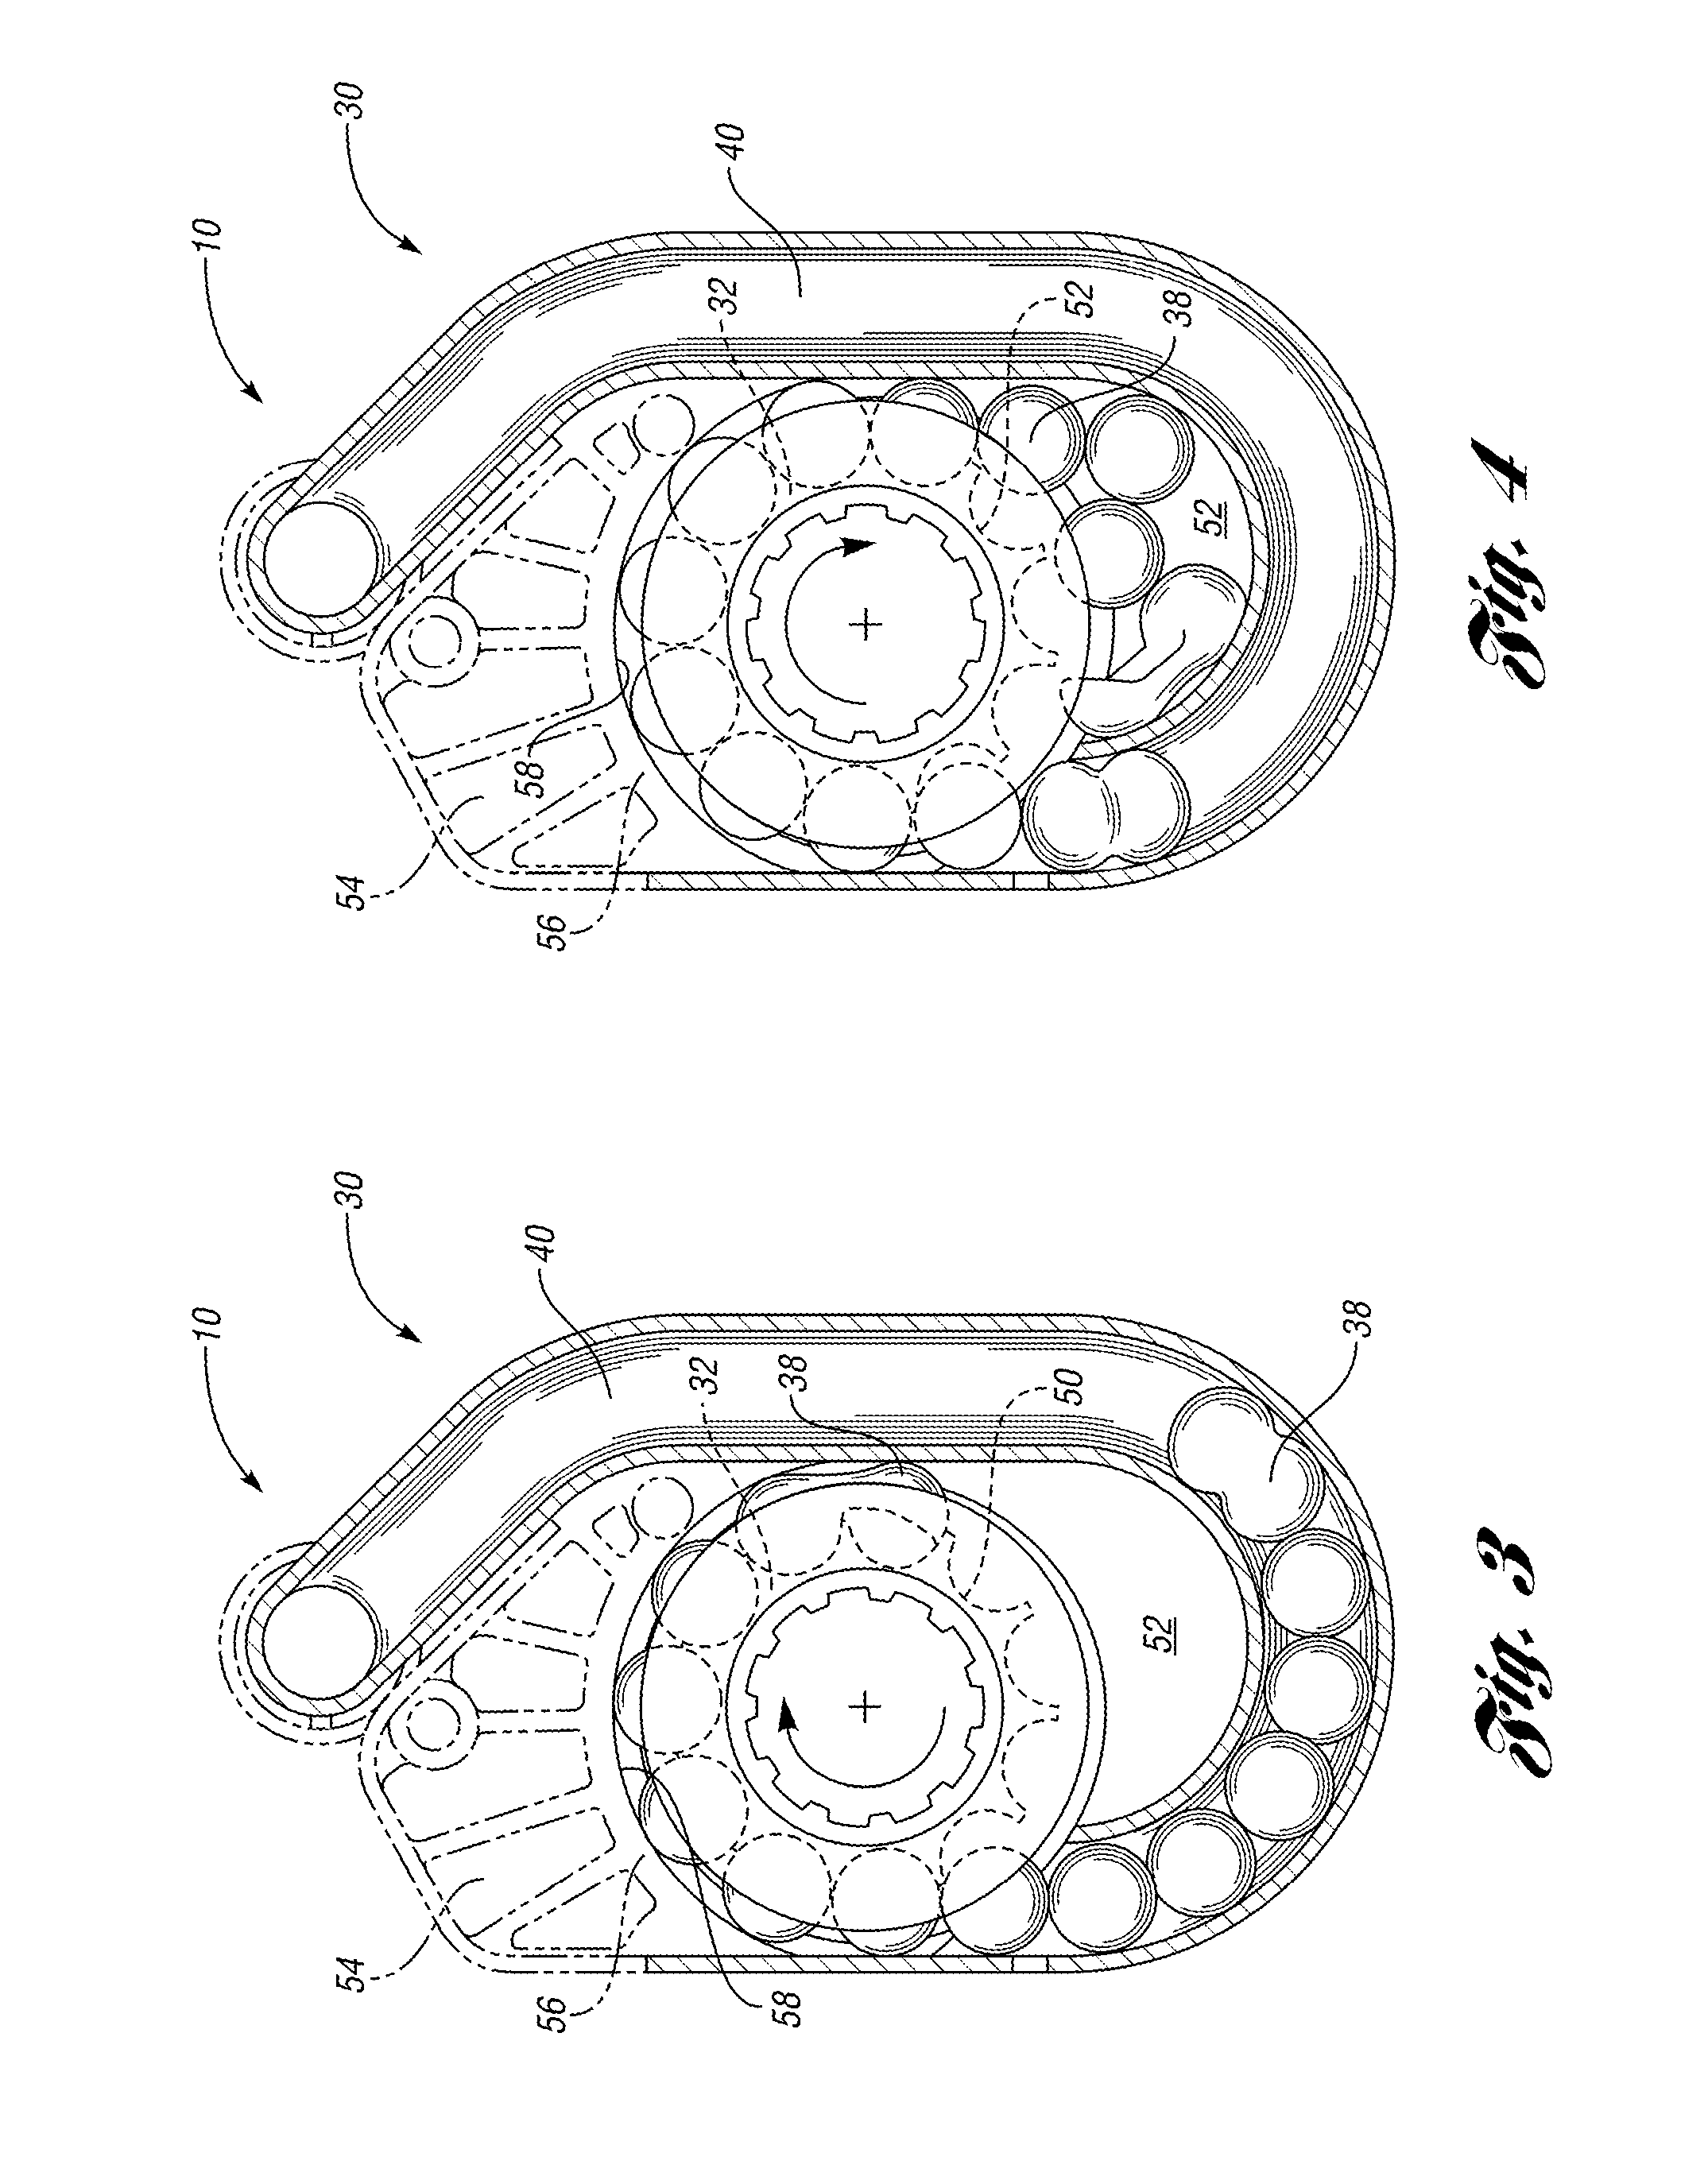 Device for pretensioning a seatbelt